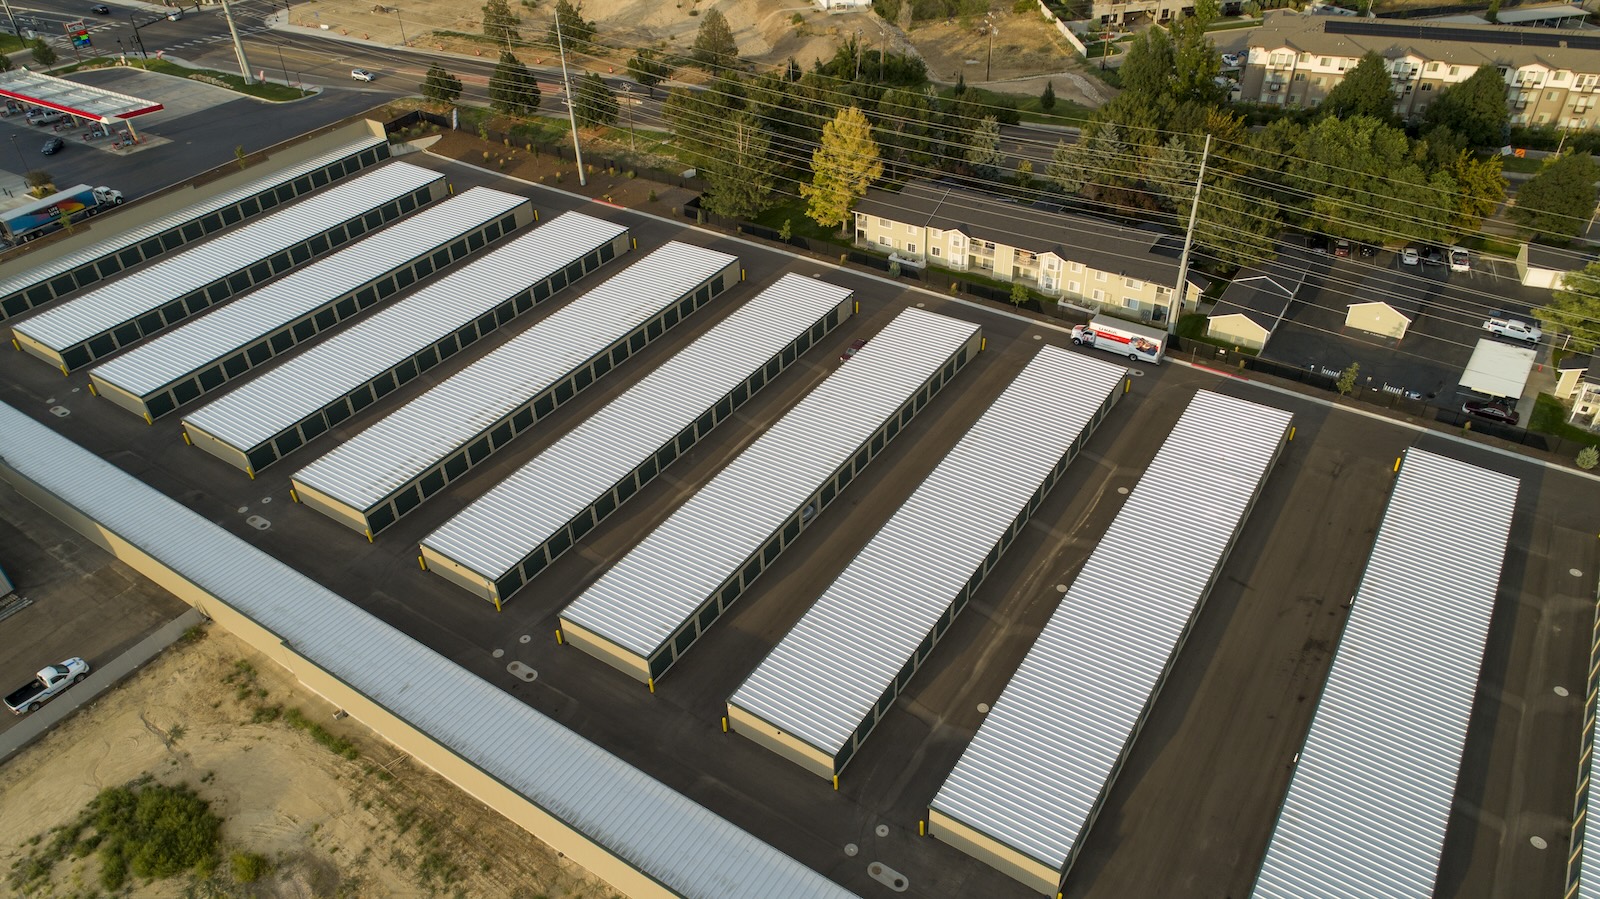 New storage facility aerial shot needing marketing to help with lease-up.